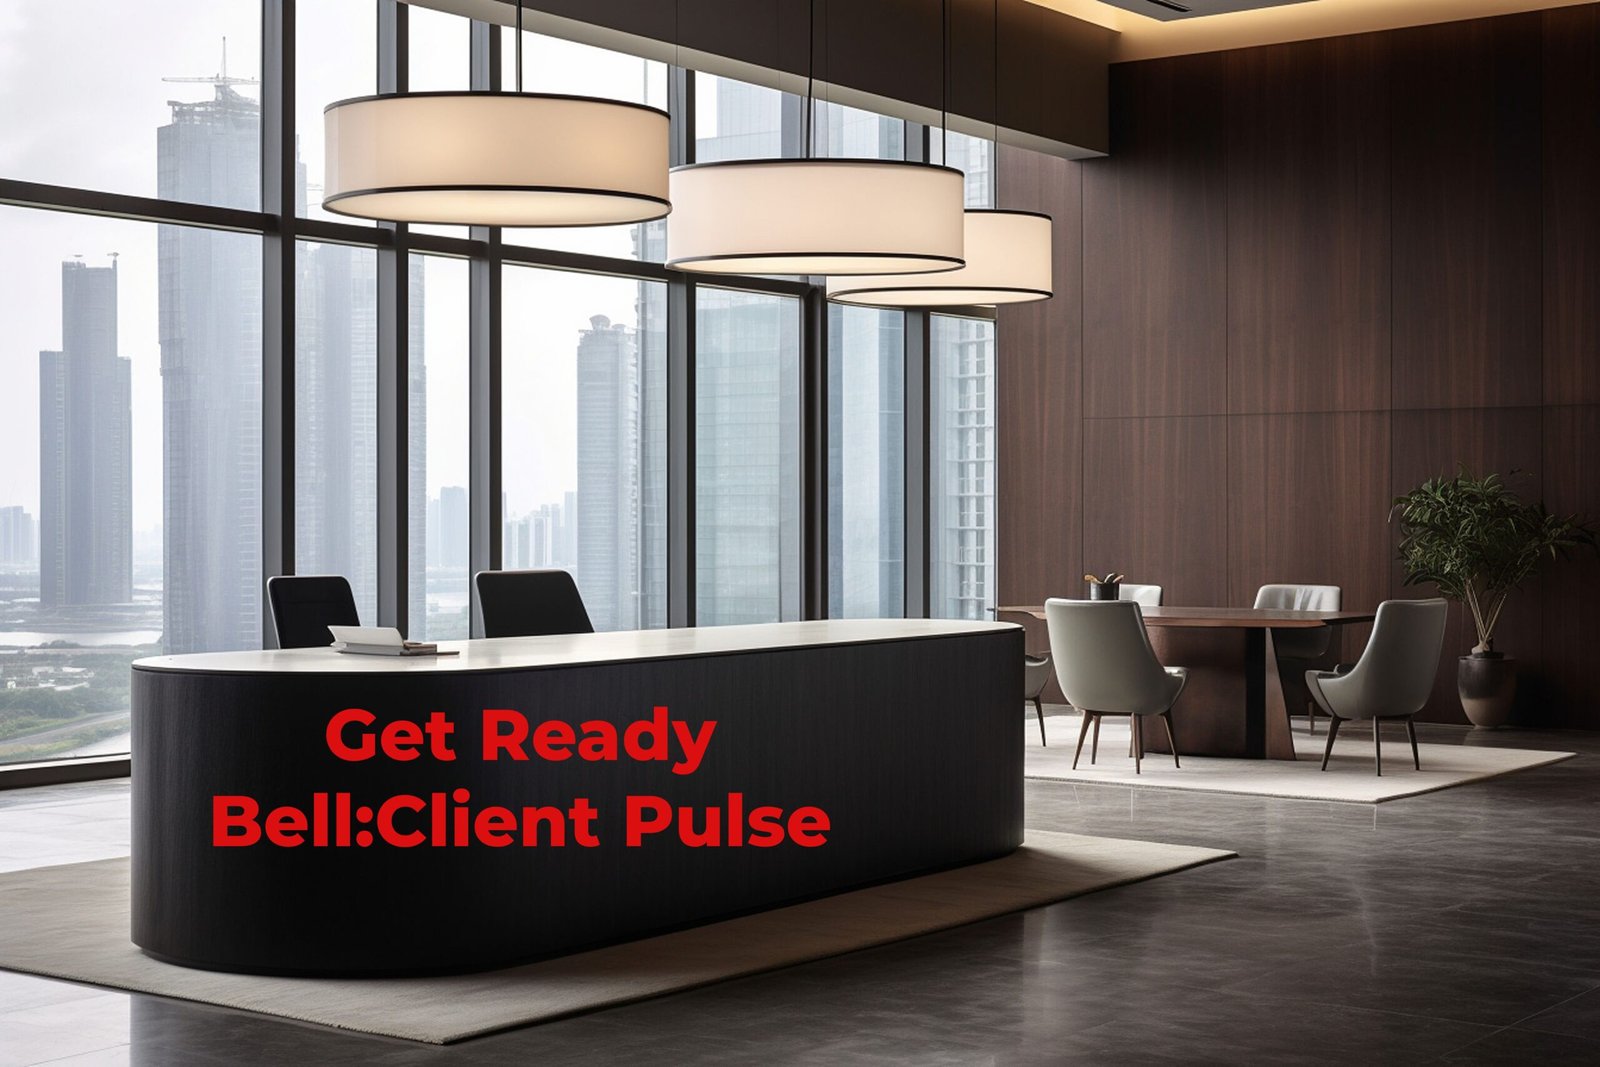 Get_Ready_Bell:Client_Pulse